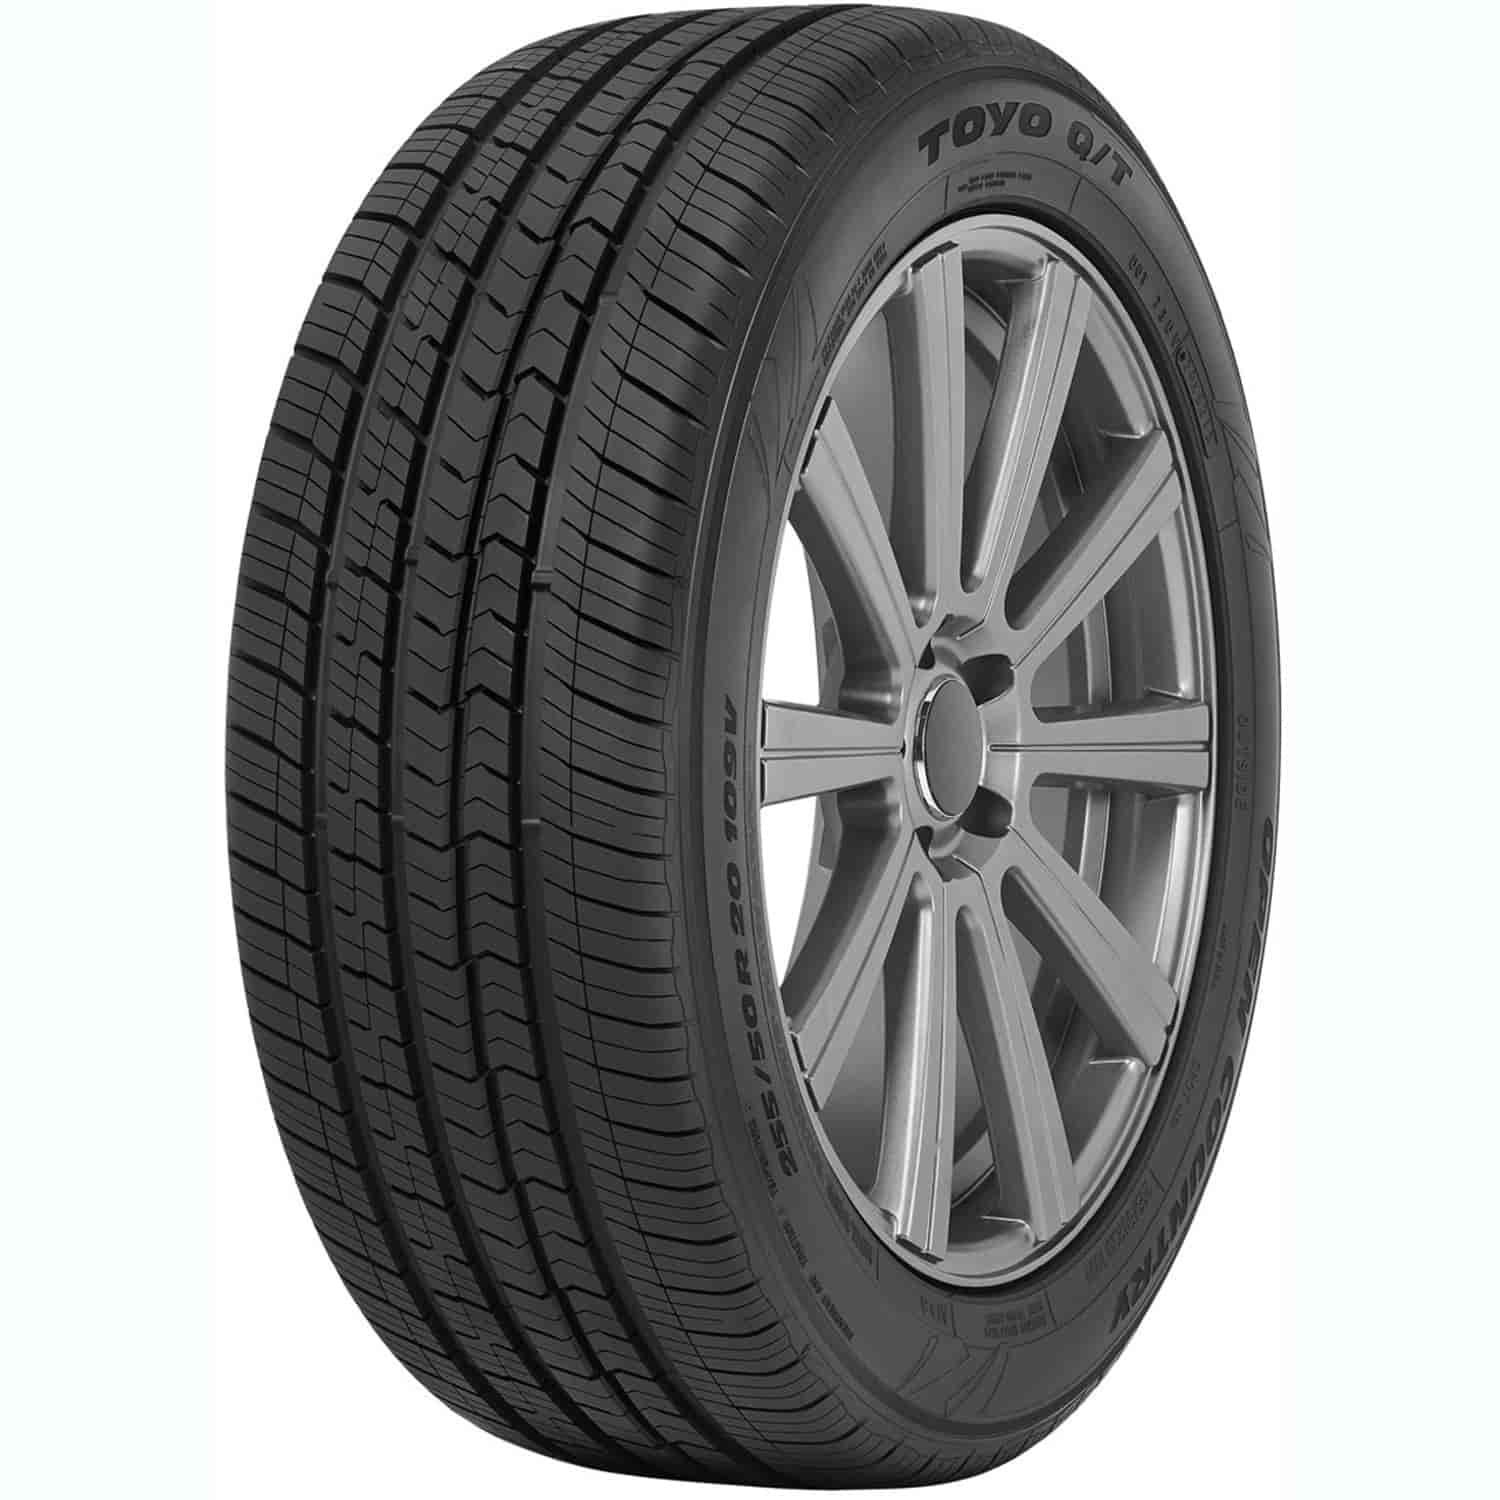 OPEN COUNTRY Q/T 255/55R20 110V XL